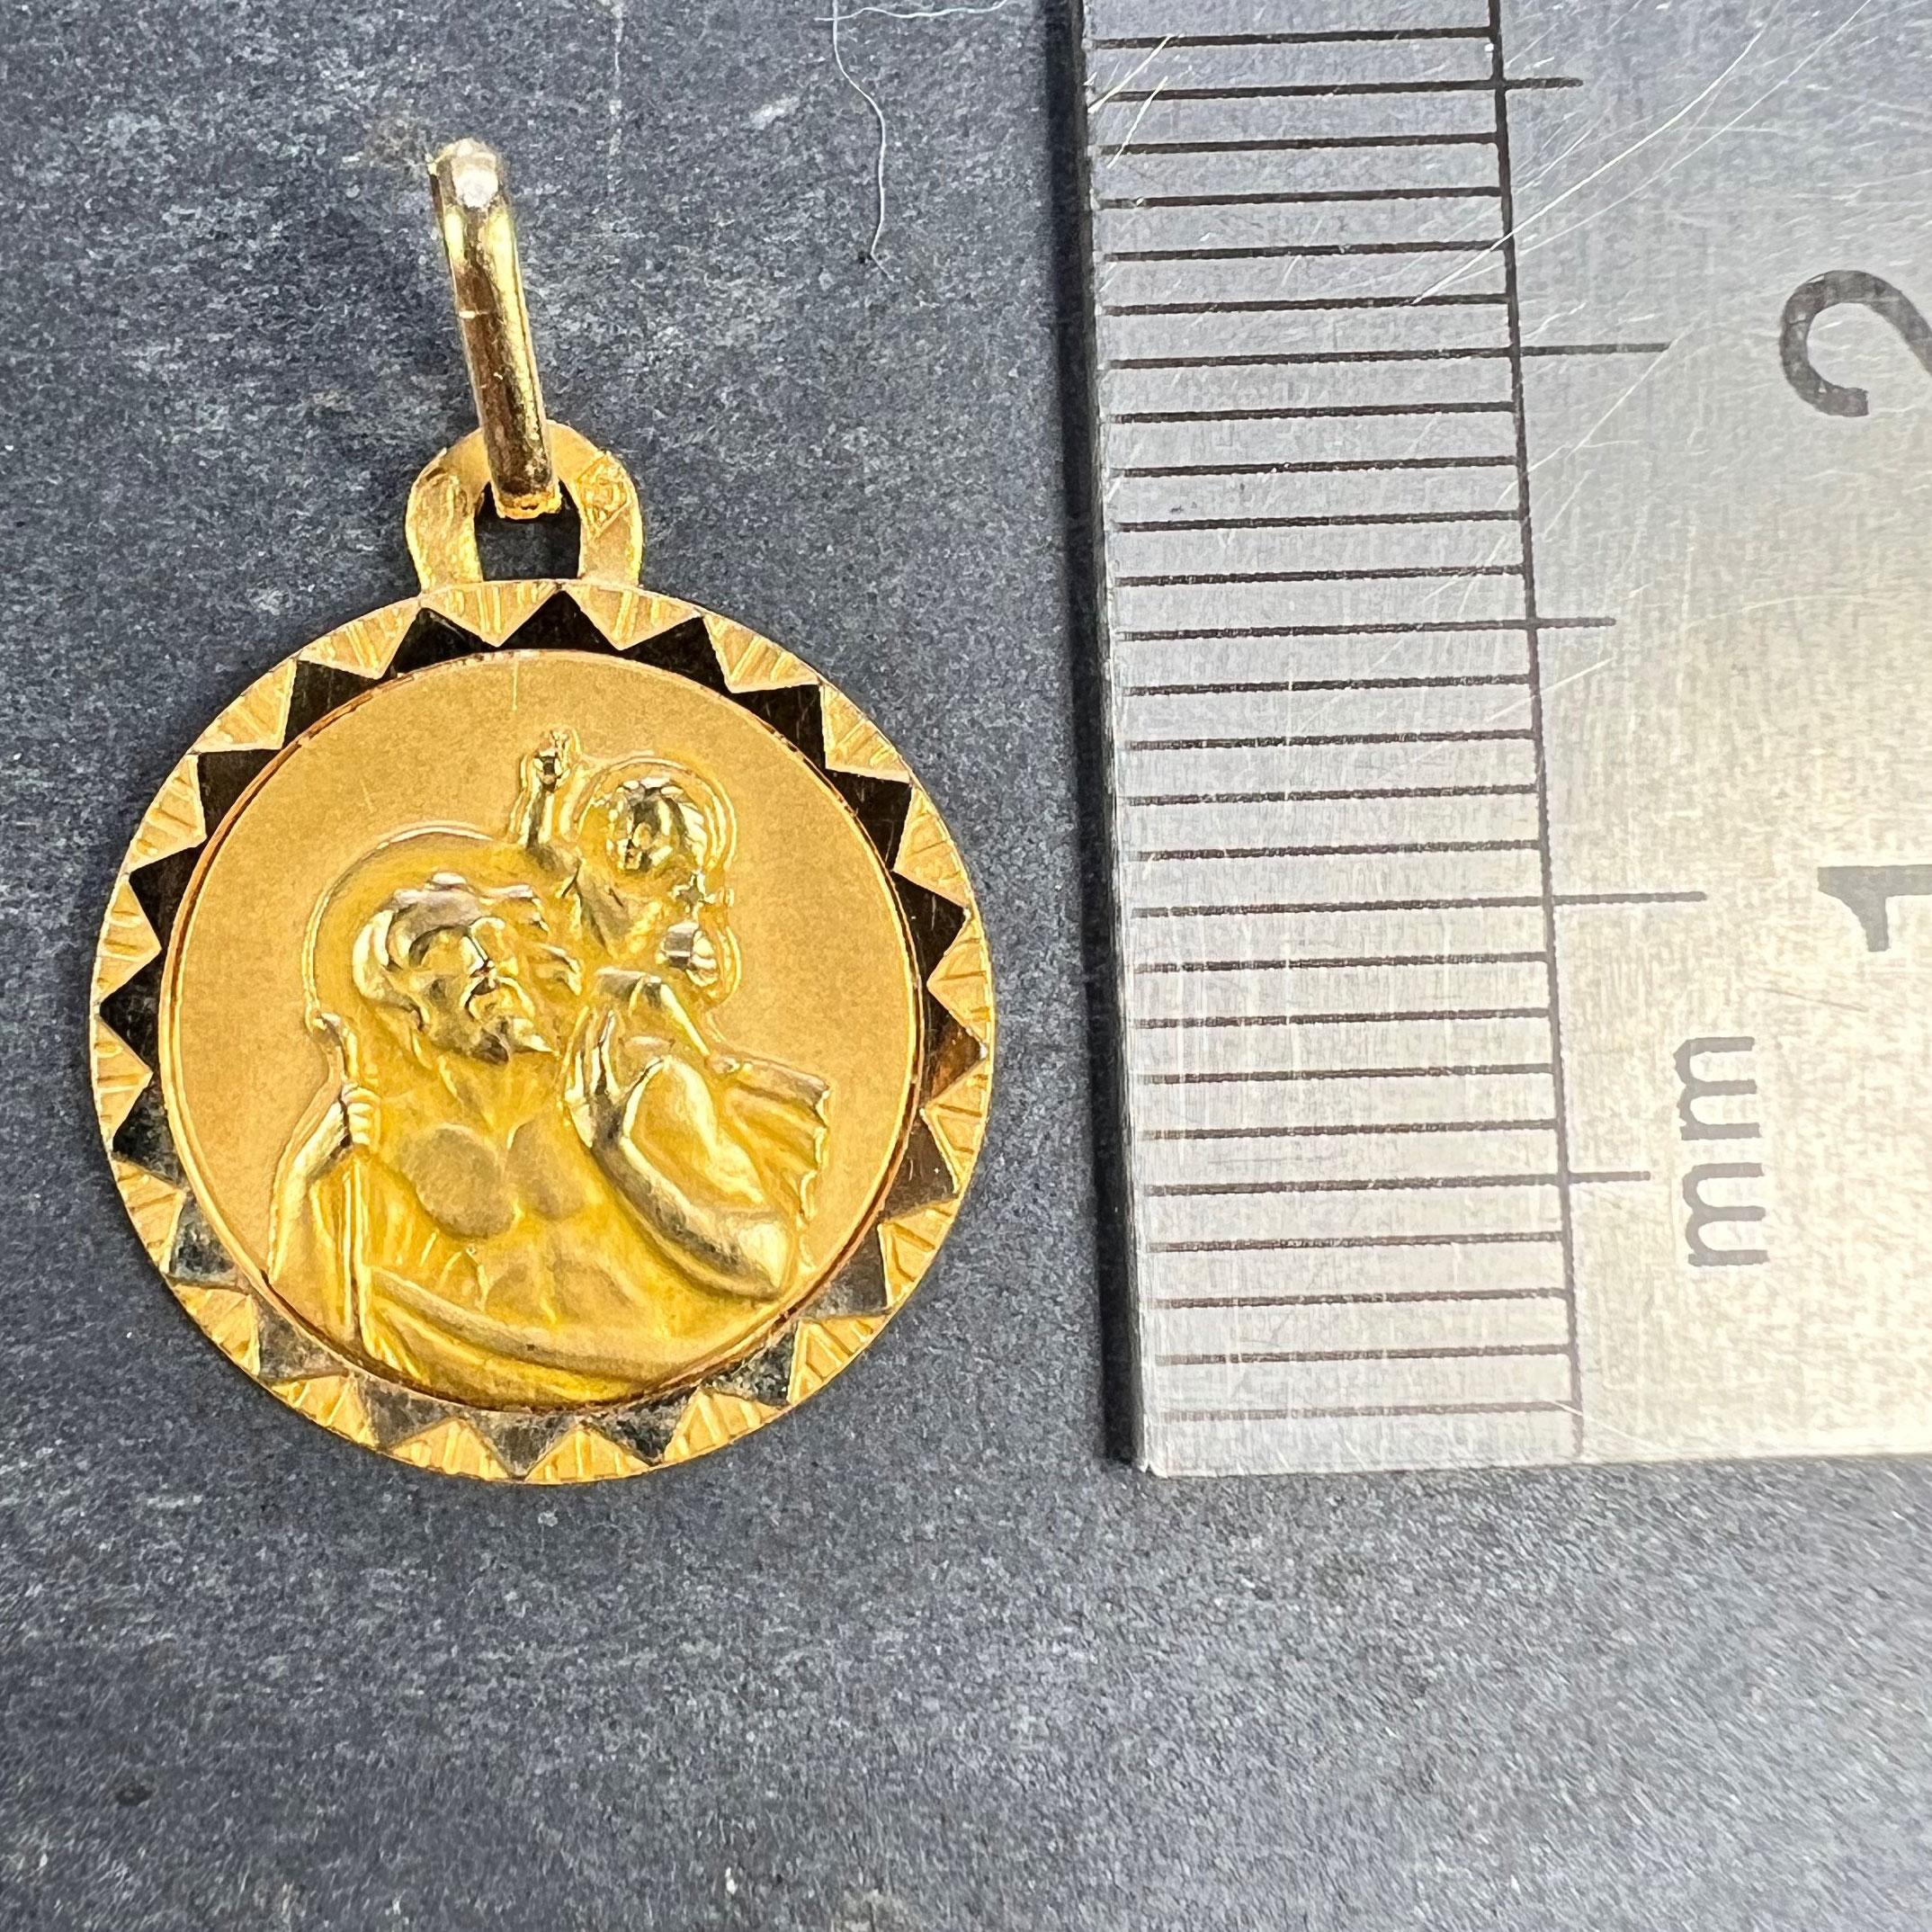 French Perroud Saint Christopher 18K Yellow Gold Medal Pendant For Sale 5